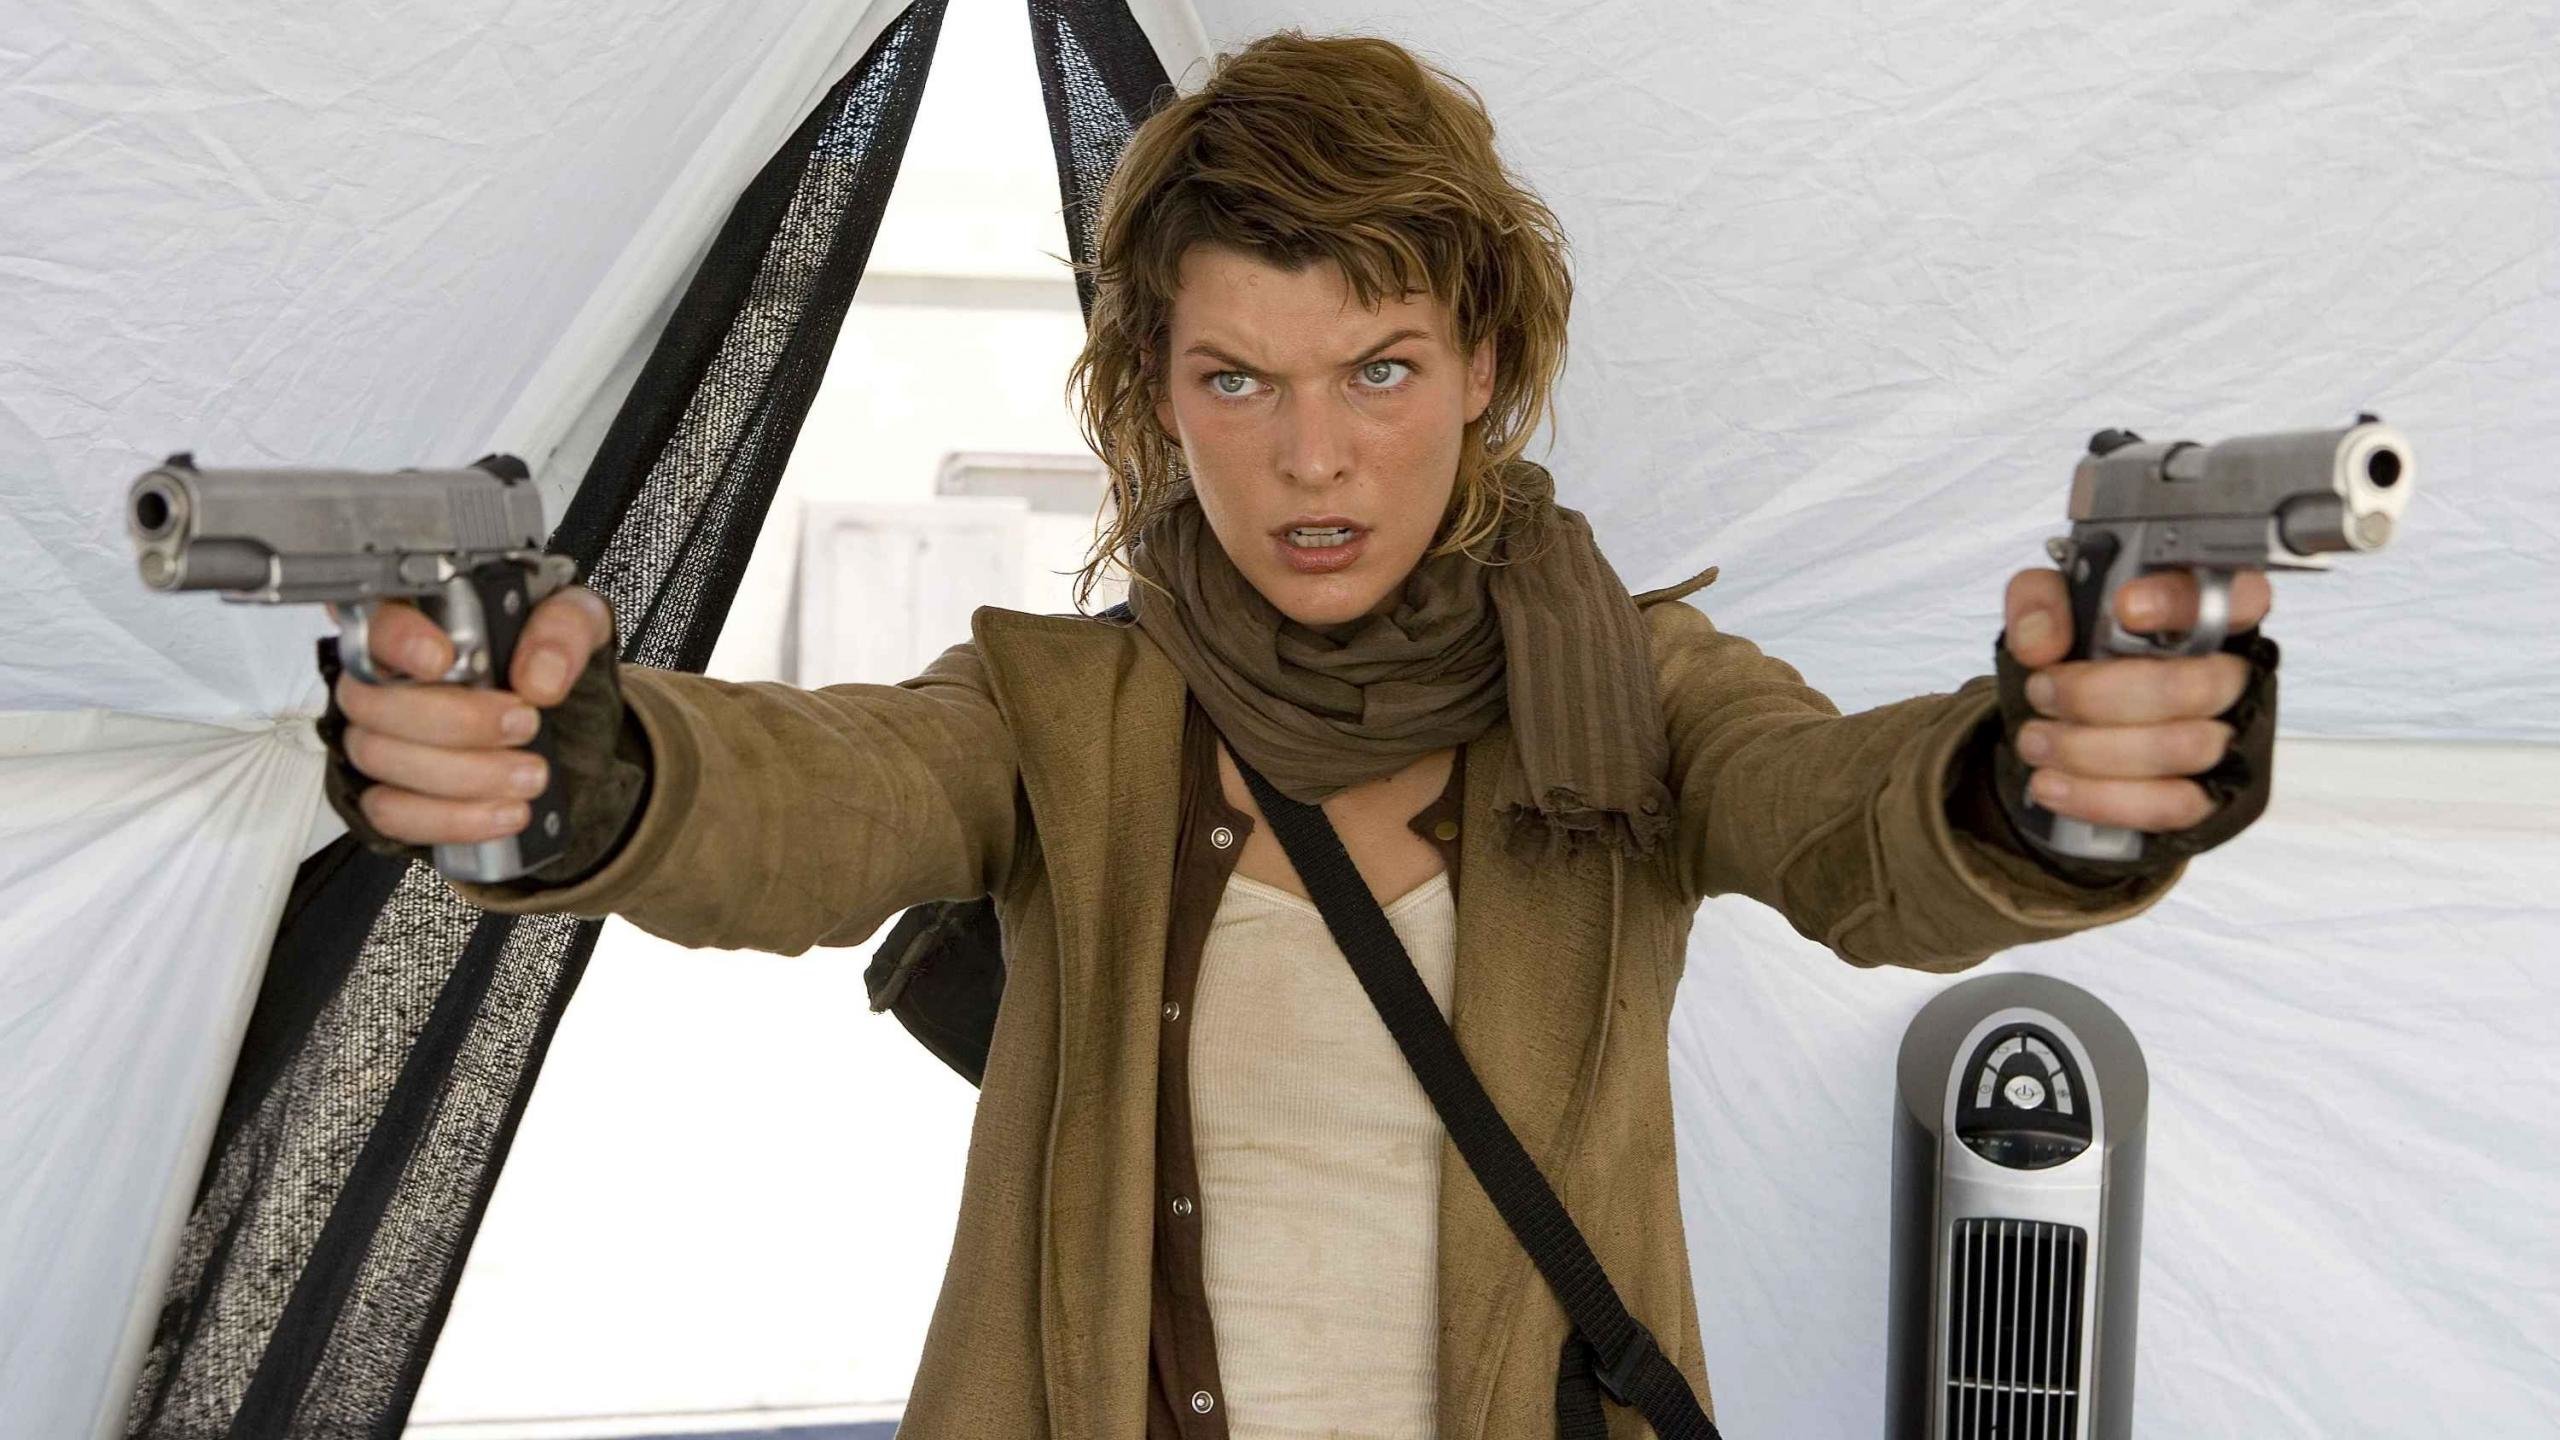 Awesome Resident Evil: Extinction free wallpaper ID:276010 for hd 2560x1440 desktop